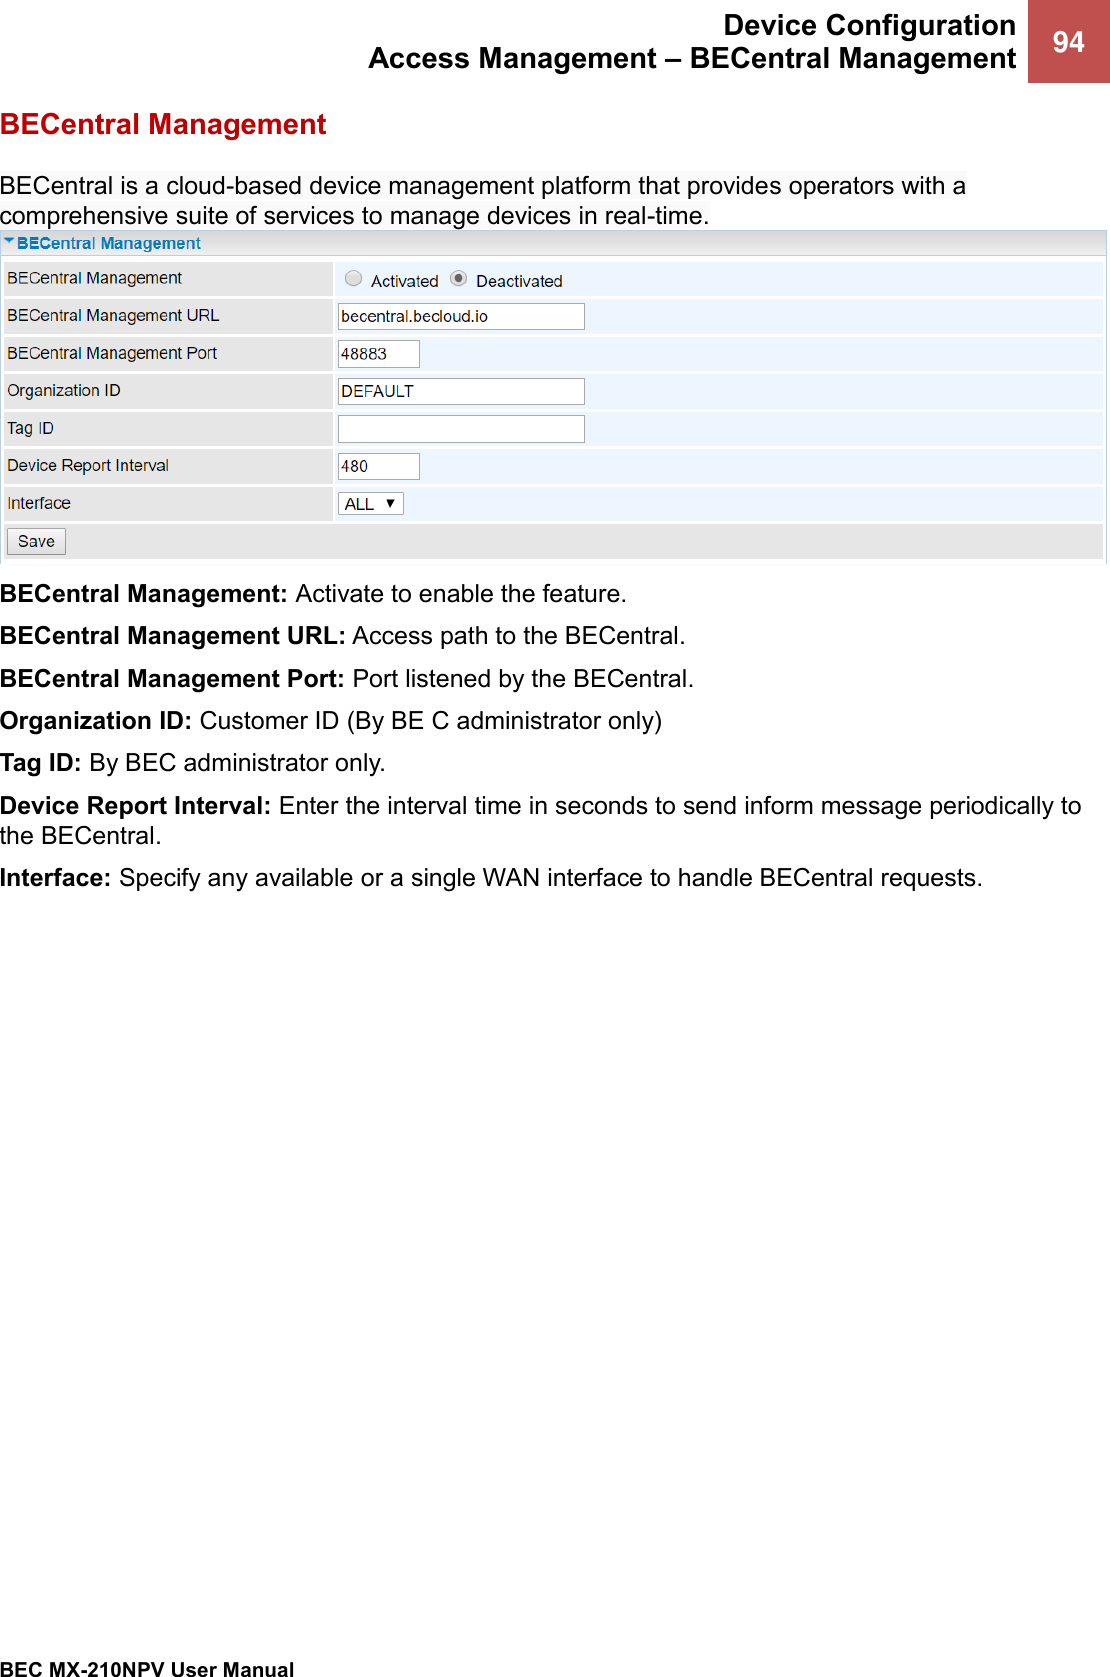  Device Configuration Access Management – BECentral Management 94   BEC MX-210NPV User Manual  BECentral Management BECentral is a cloud-based device management platform that provides operators with a comprehensive suite of services to manage devices in real-time. BECentral Management: Activate to enable the feature. BECentral Management URL: Access path to the BECentral. BECentral Management Port: Port listened by the BECentral. Organization ID: Customer ID (By BE C administrator only) Tag ID: By BEC administrator only.  Device Report Interval: Enter the interval time in seconds to send inform message periodically to the BECentral.  Interface: Specify any available or a single WAN interface to handle BECentral requests. 